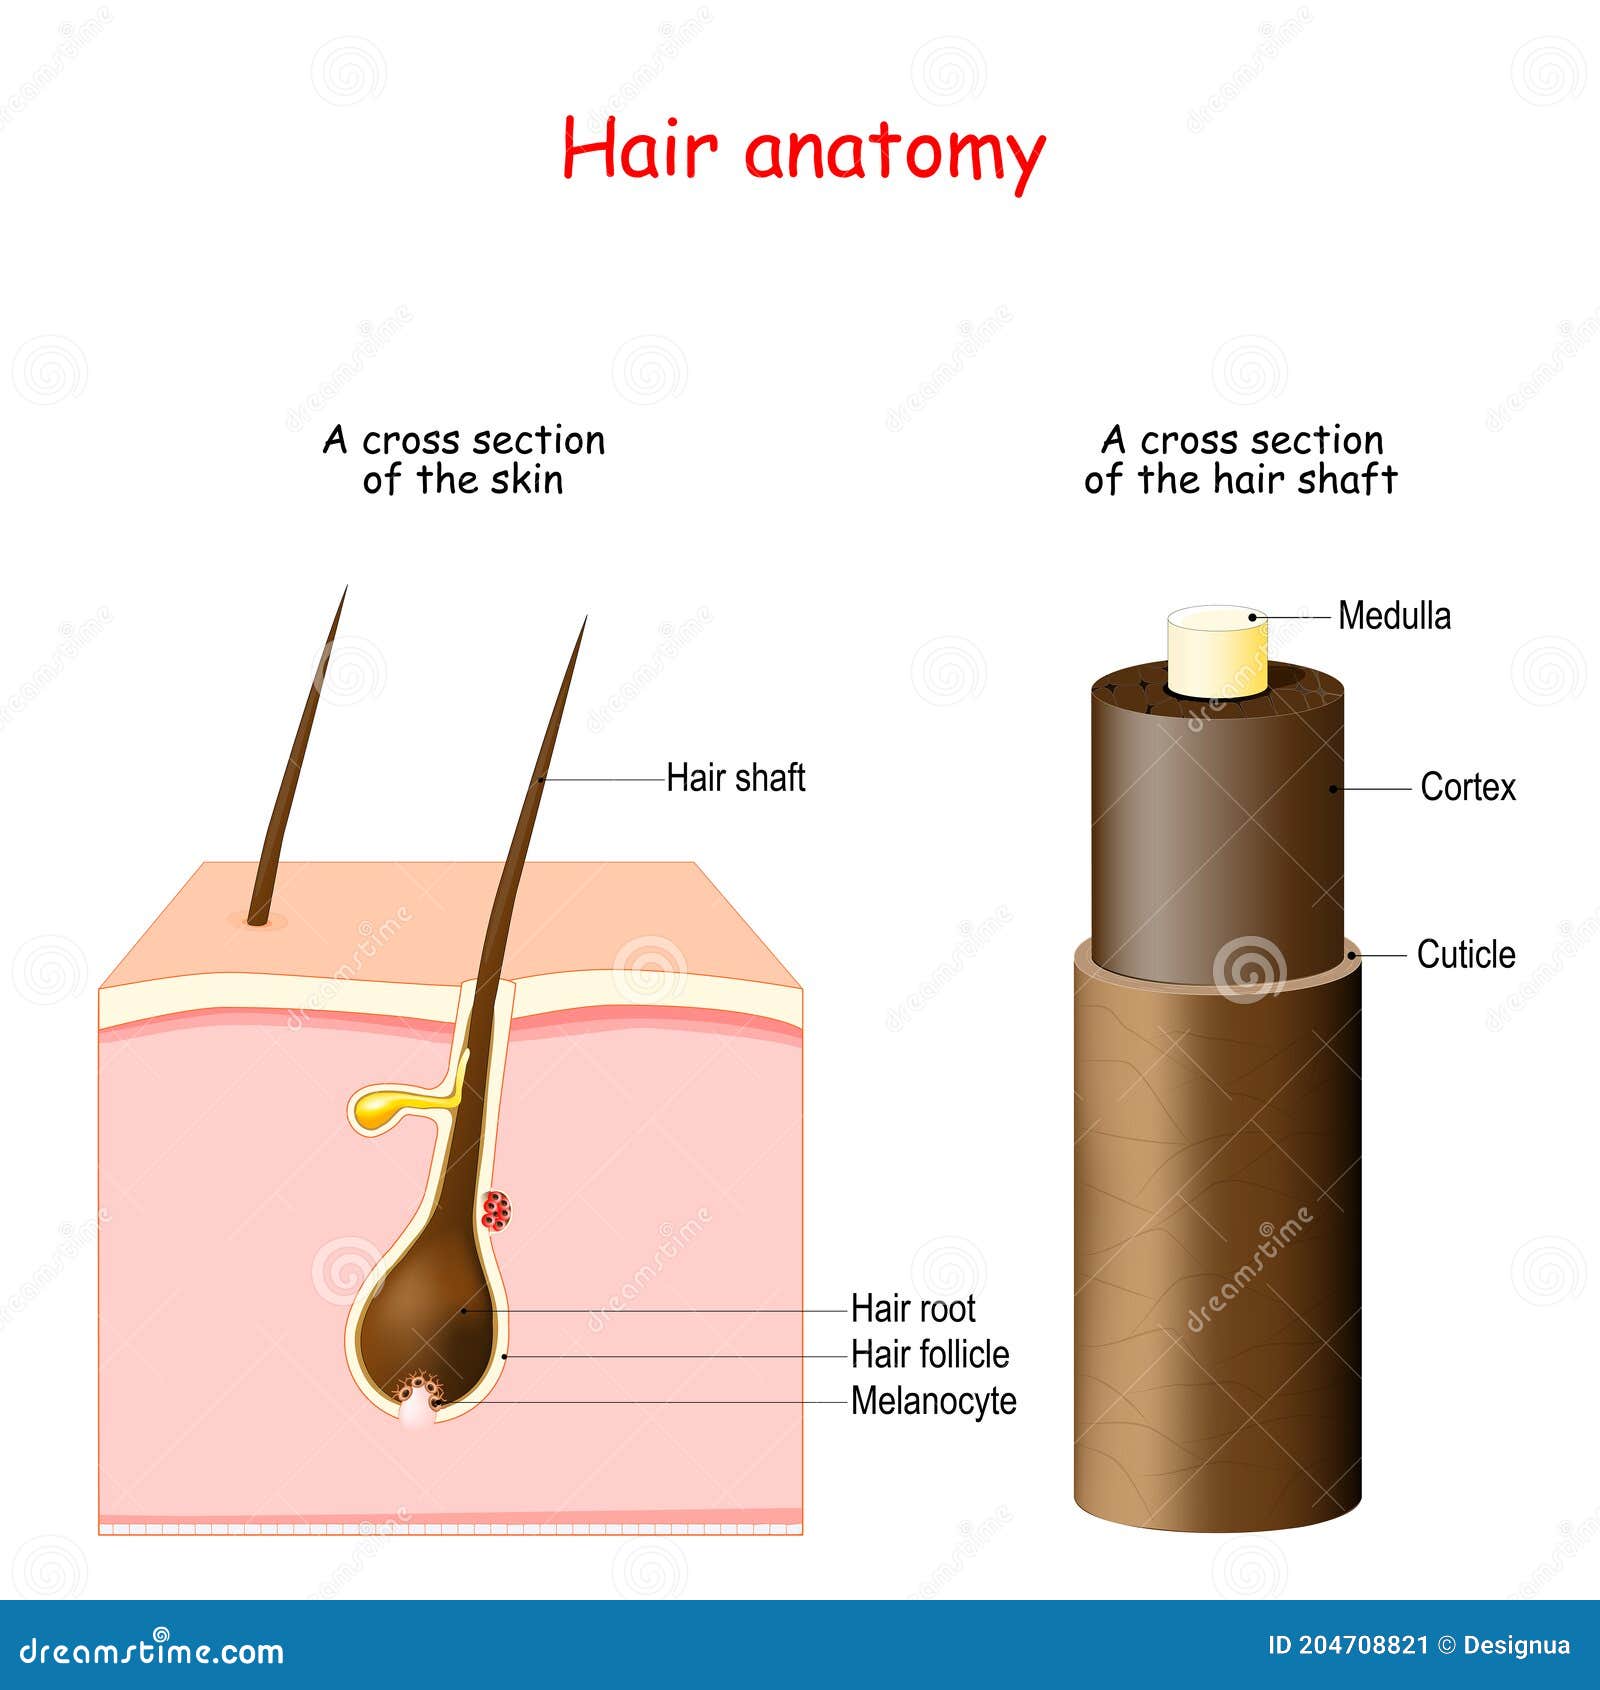 Anatomy structure and phases of hair growth